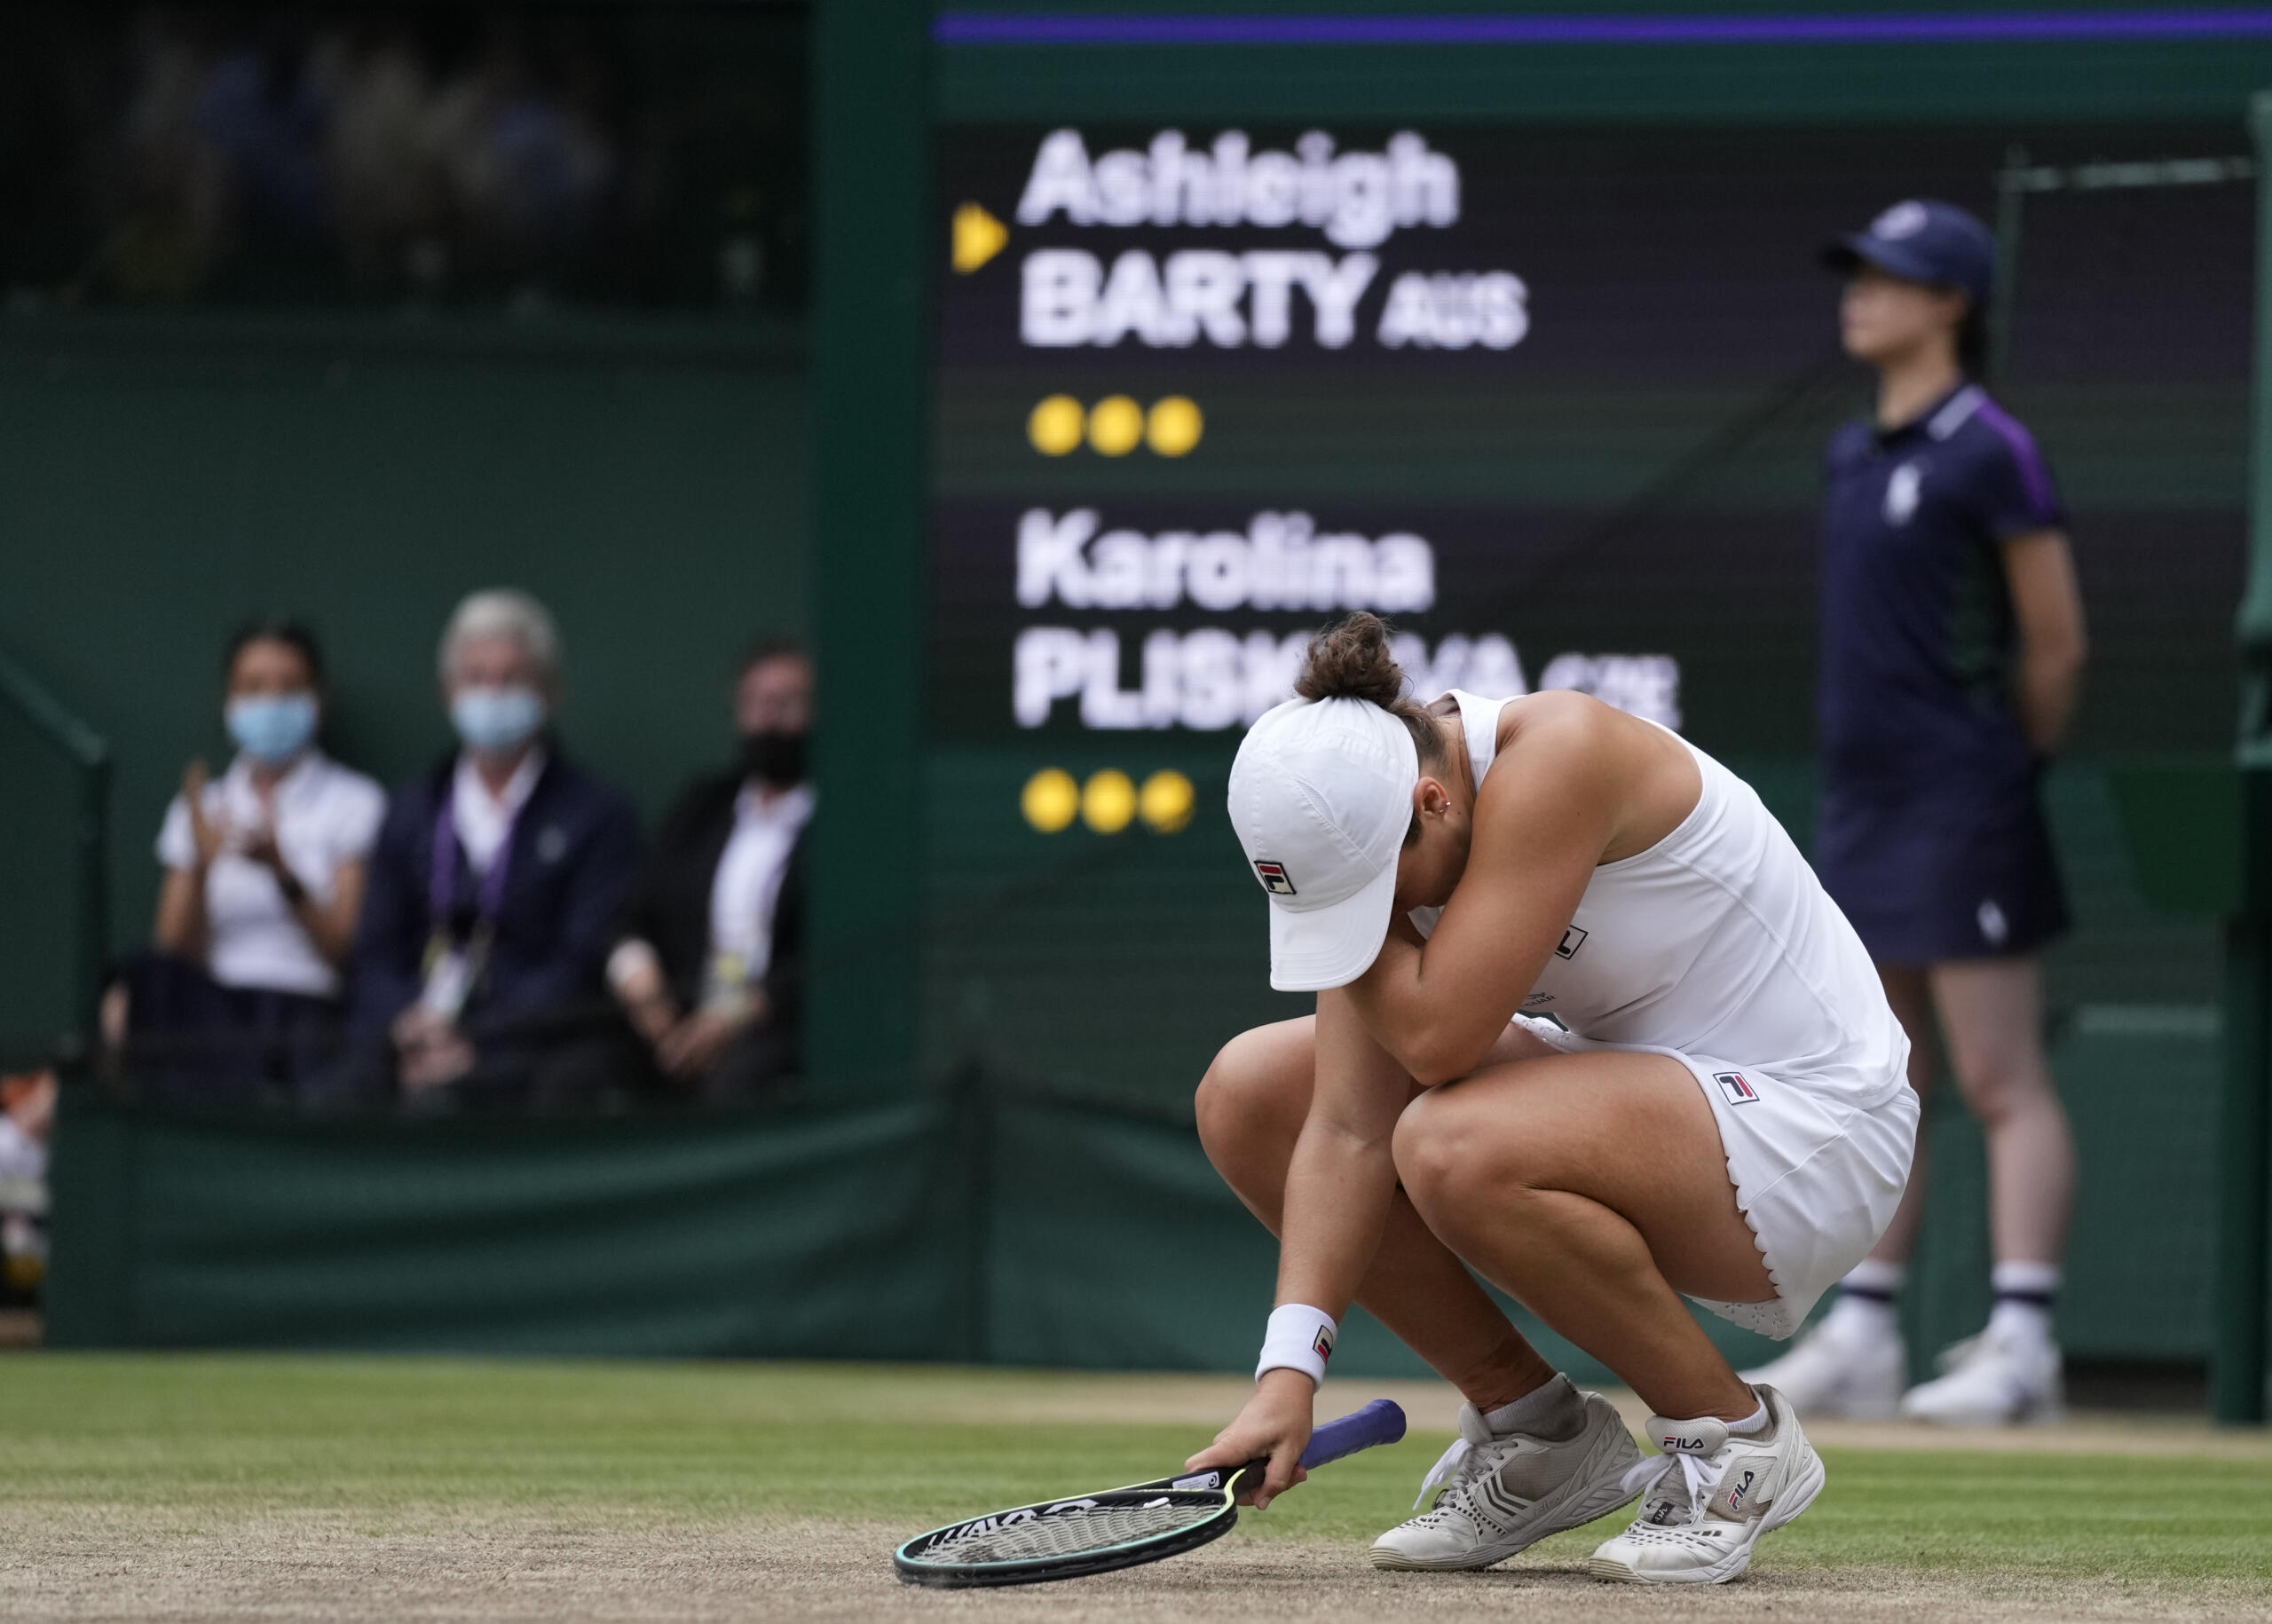 Australia's Ashleigh Barty reacts after defeating the Czech Republic's Karolina Pliskova in the women's singles final on day twelve of the Wimbledon Tennis Championships in London, Saturday, July 10, 2021.